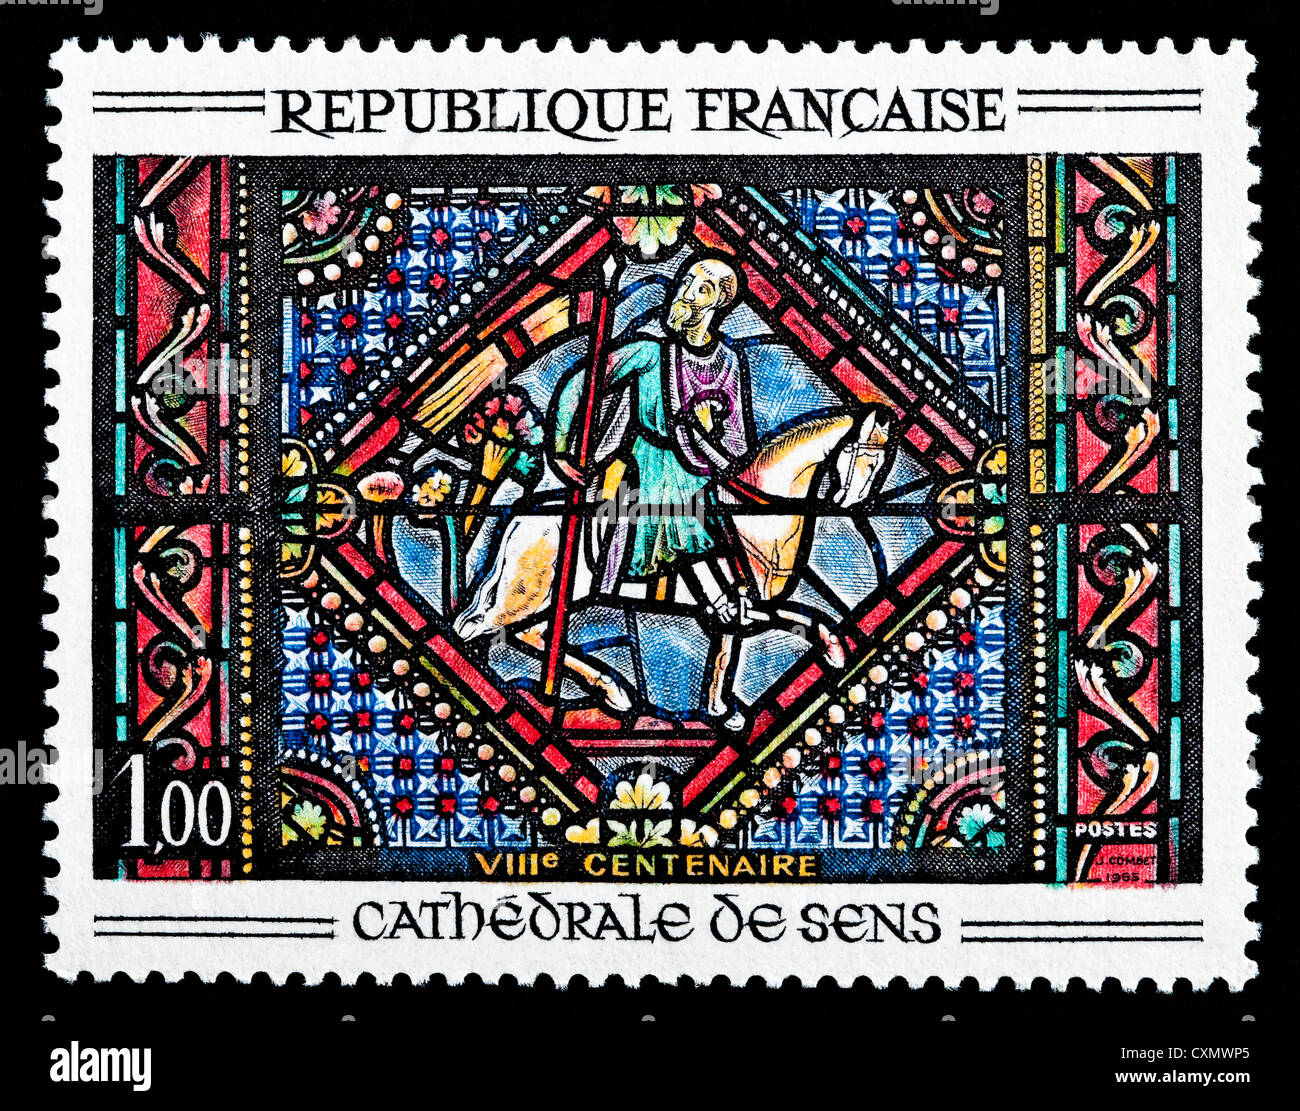 Unused 1965 French postage stamp depicting 'St Paul on Road to Damascus' stained glass window. Stock Photo